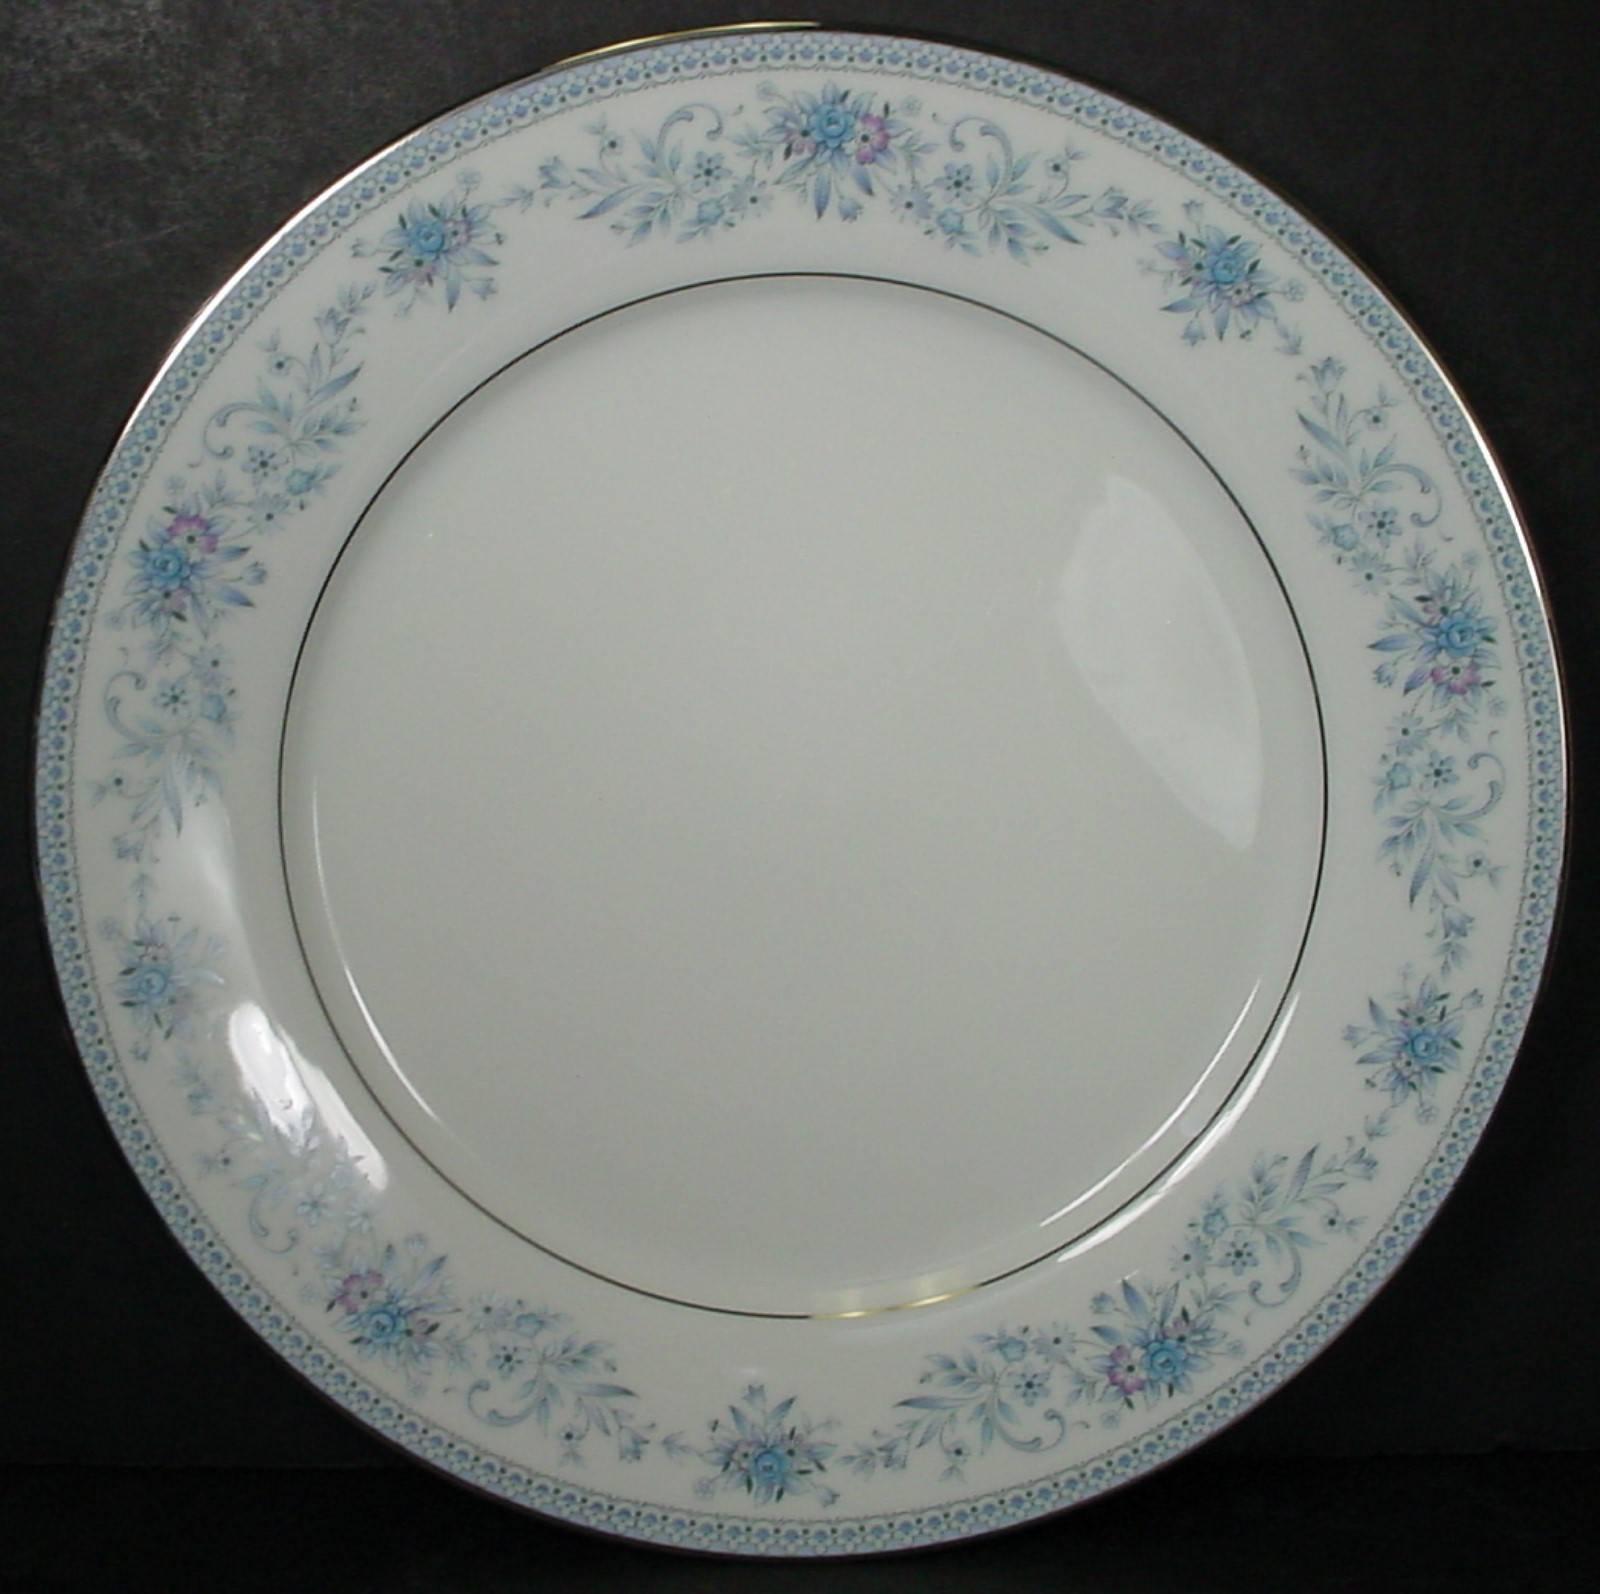 CHINA FINDERS 

China, Crystal, Flatware and Collectible Matching Service is offering ONE (1) 

NORITAKE china BLUE HILL 2482 pattern 65-piece Set Service for 12

in great condition free from chips, cracks, break or stain.

• Blue Floral